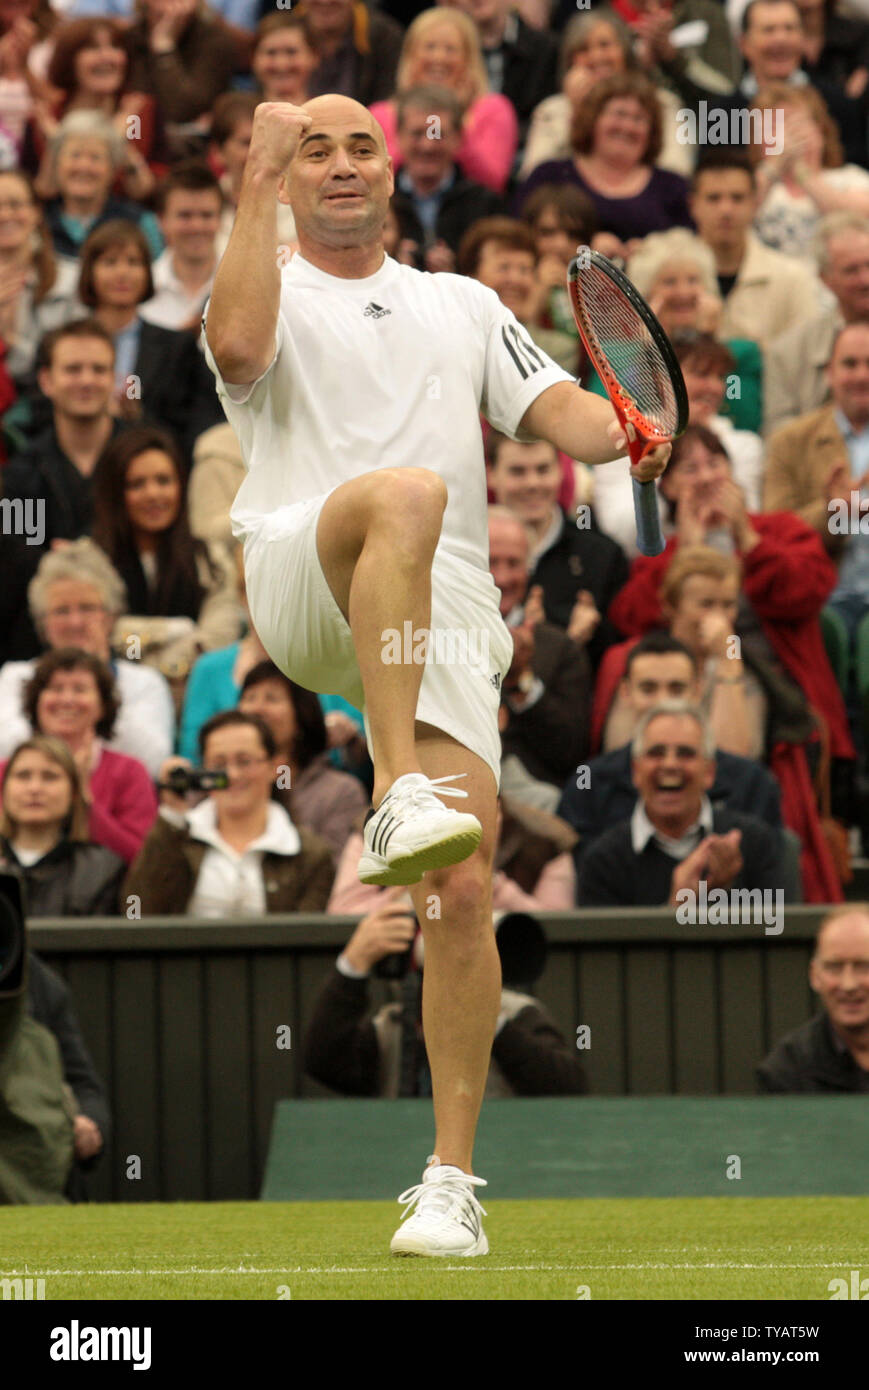 American tennis star Andre Agassi celebrates a point during a mixed doubles match with his wife Steffi Graf against Britain Tim Henman and Kim Clijsters. The match was played to celebrate the first game on the new Wimbledon Center court with the roof fully closed on Sunday May 17 2009. (UPI Photo/Hugo Philpott) Stock Photo